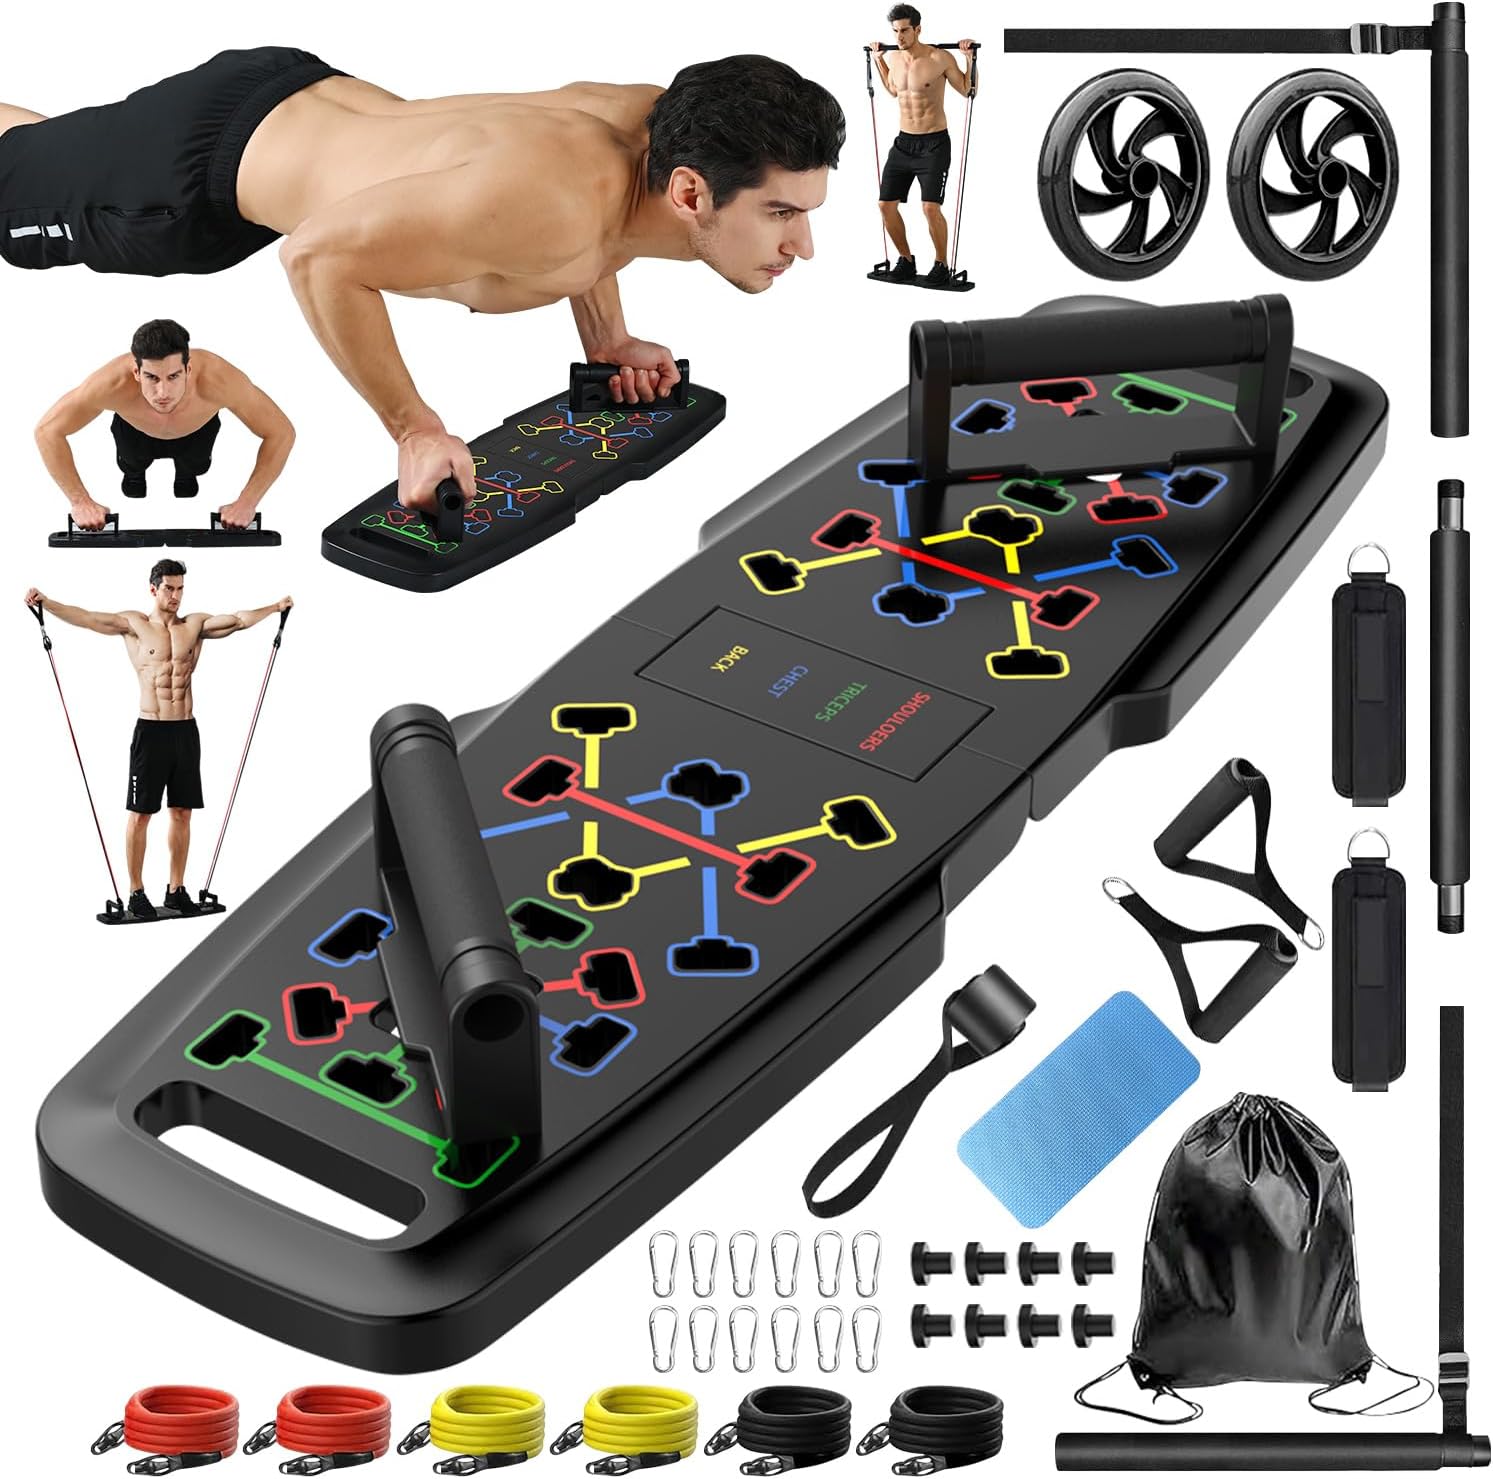 Push Up Board,Home Gym,Portable Exercise Equipment,Pilates Bar & 20 Fitness Accessories with Resistance Bands & Ab Roller Wheel,Full Body Workout at Home